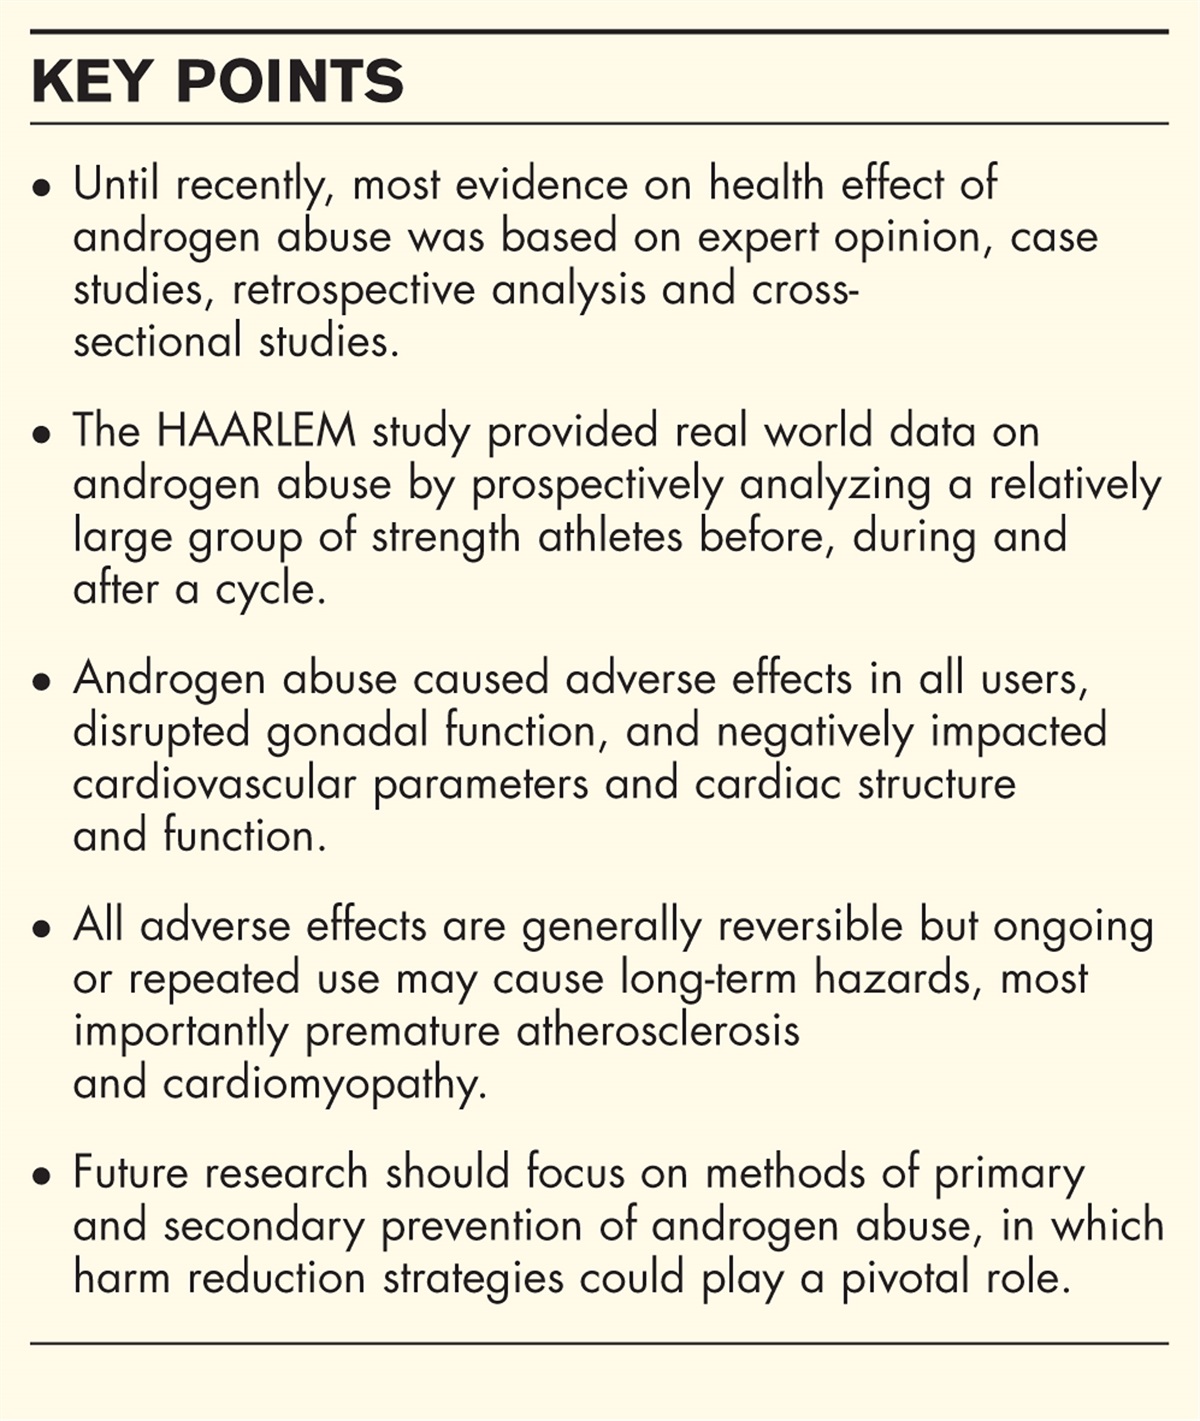 Health effects of androgen abuse: a review of the HAARLEM study